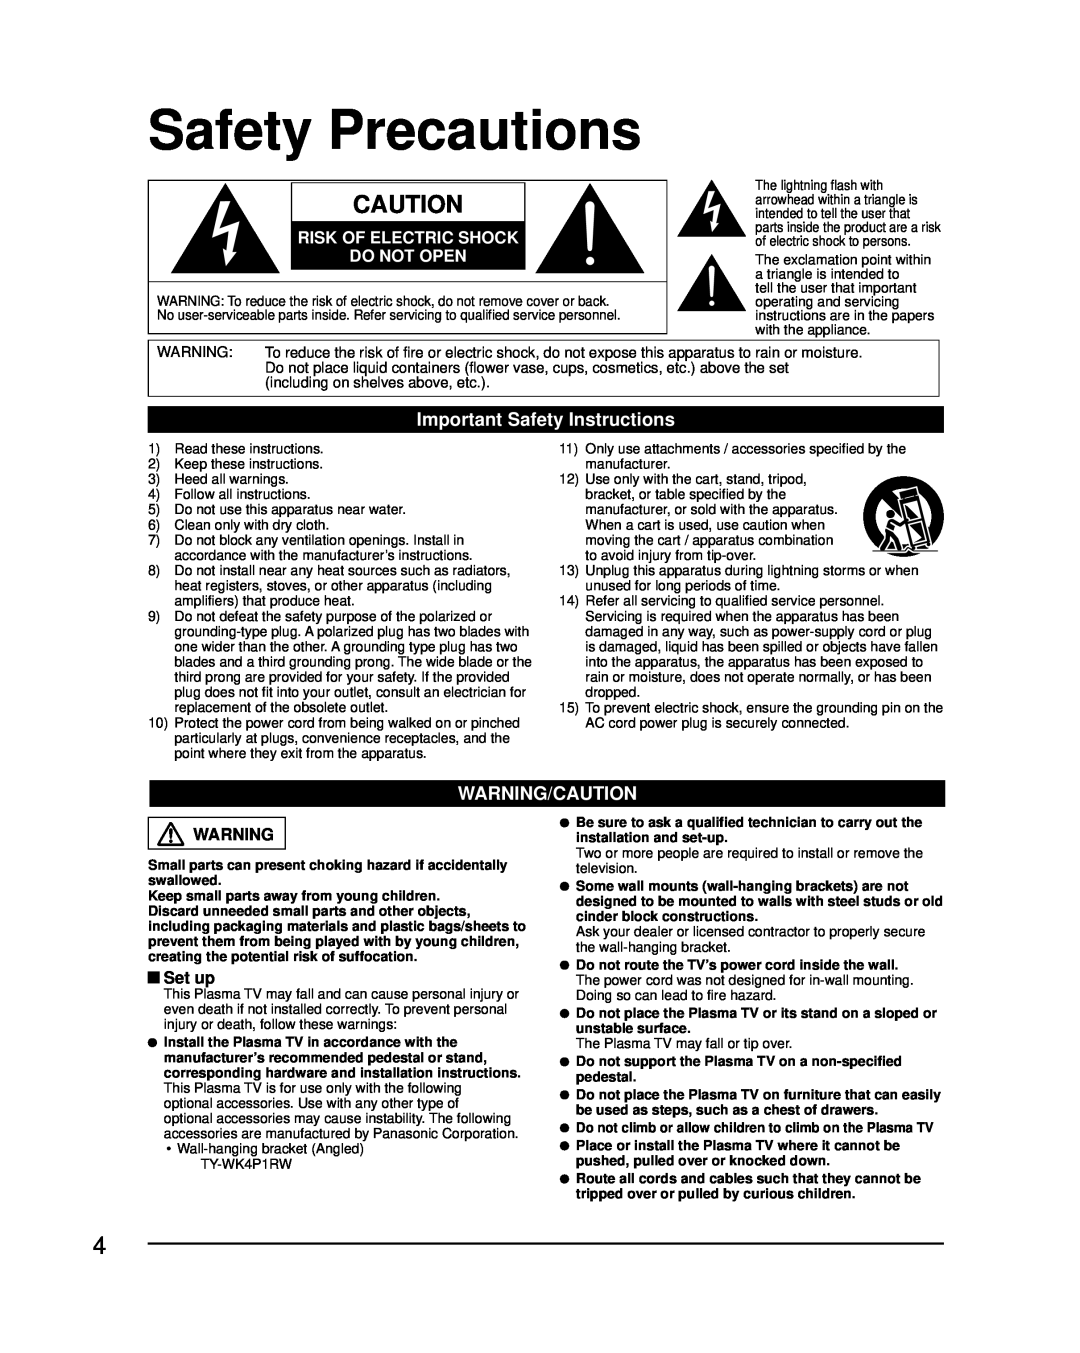 Panasonic TC-P42U2 Safety Precautions, Important Safety Instructions, Warning/Caution, Risk Of Electric Shock Do Not Open 